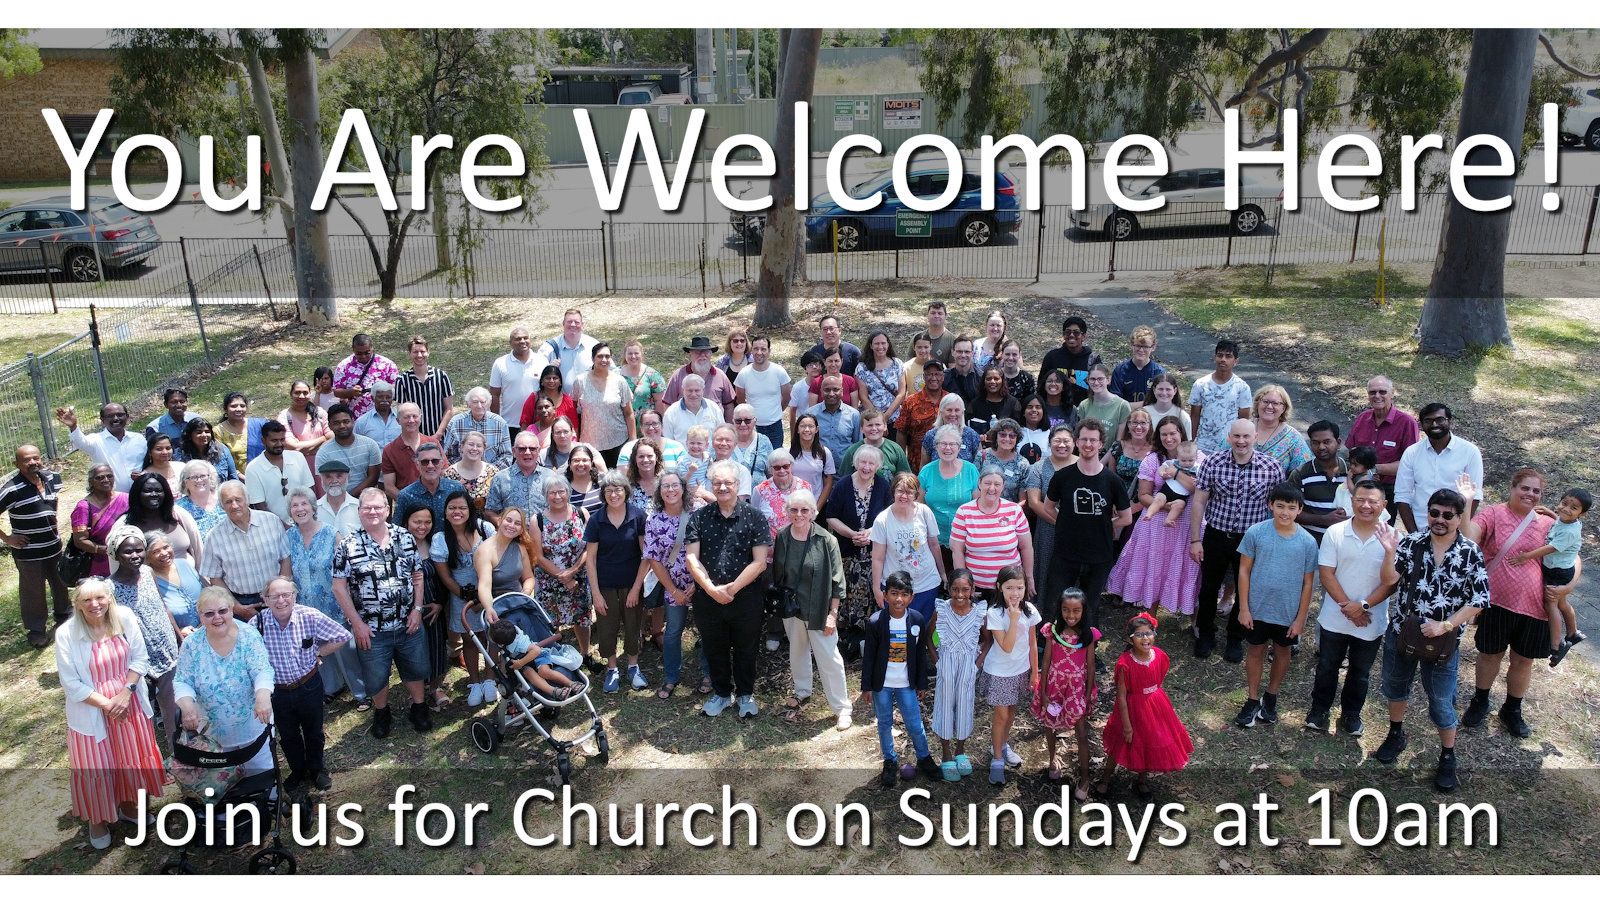 You are welcome here! Join us for Church on Sundays at 10am.